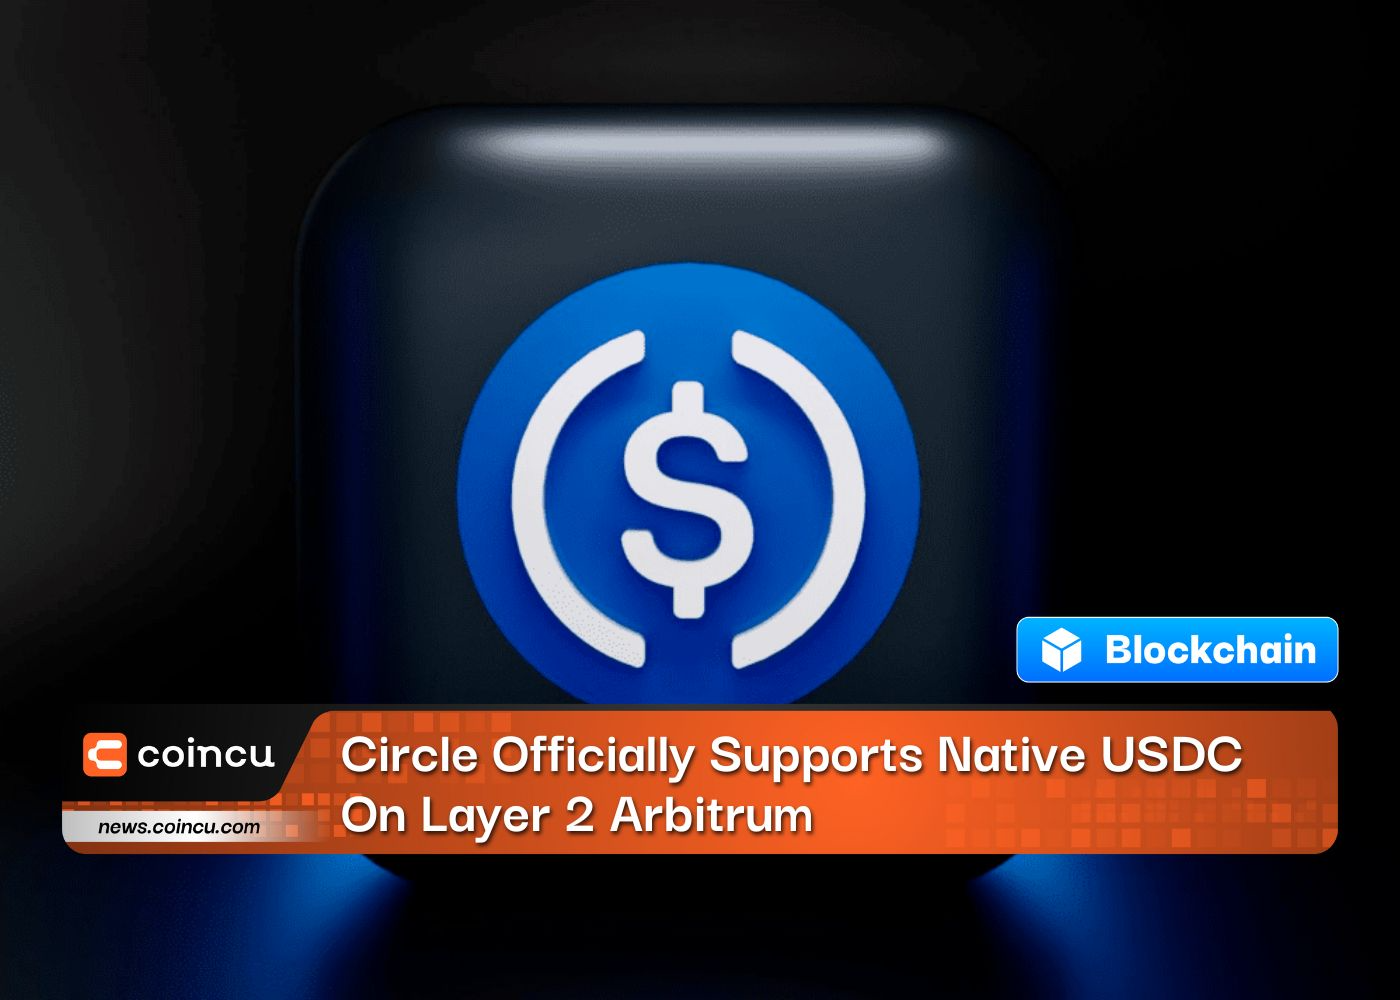 Circle Officially Supports Native USDC On Layer 2 Arbitrum